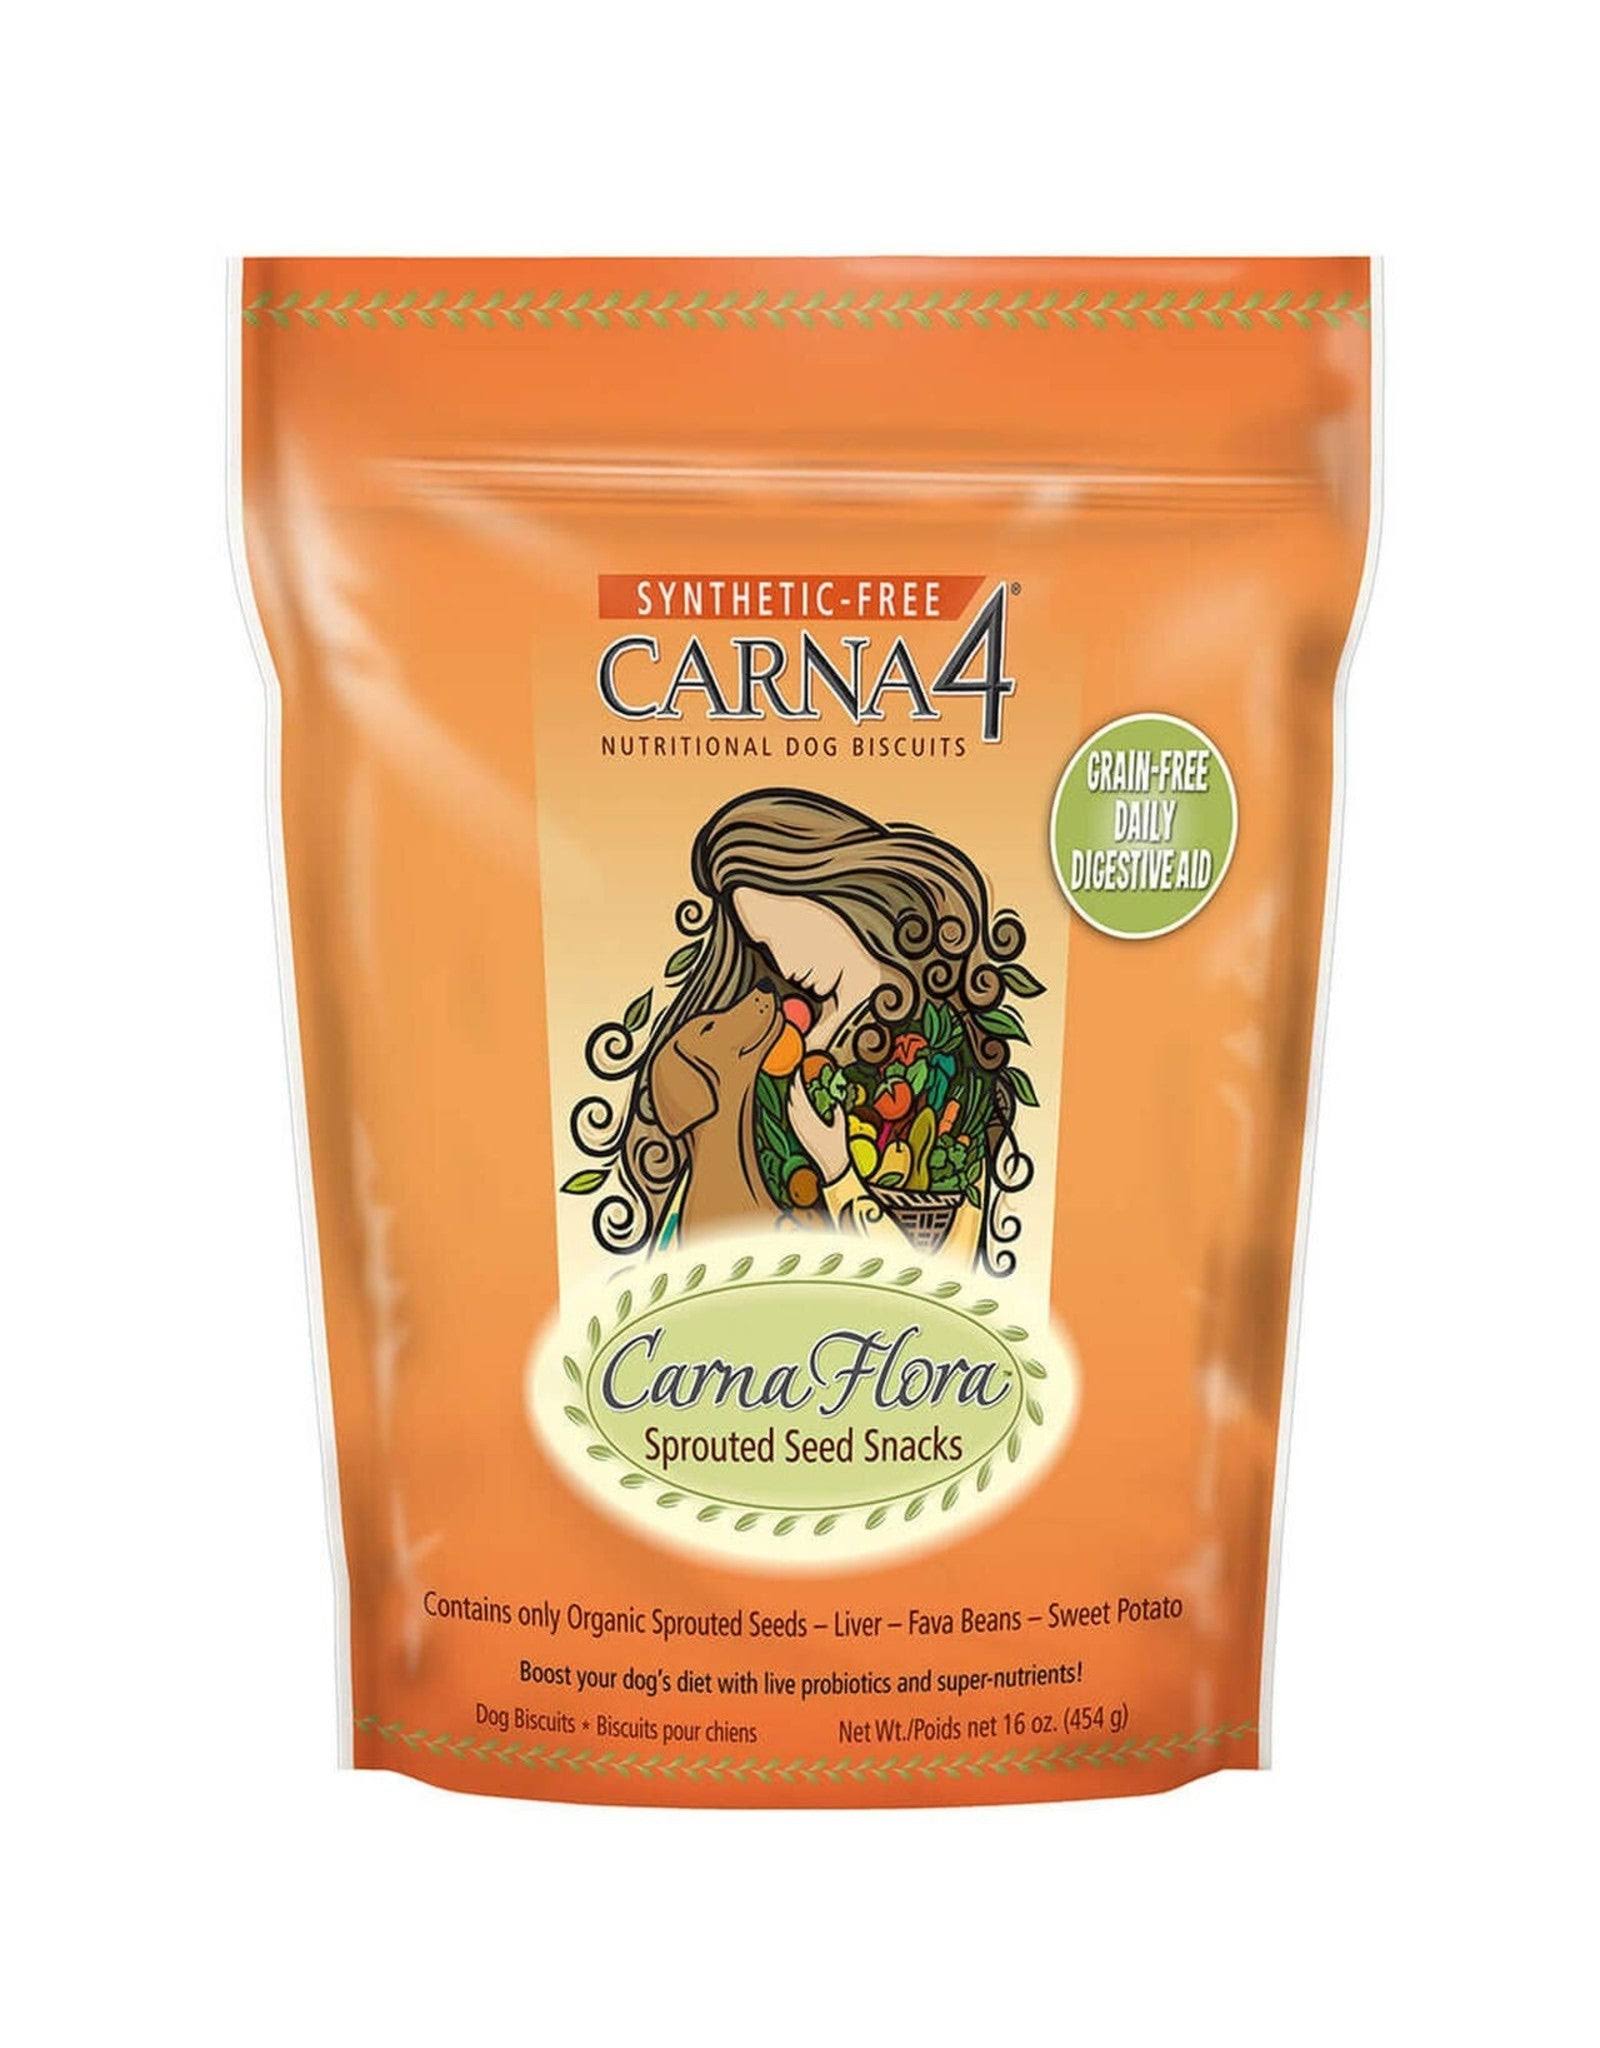 CARNA4 CarnaFlora Sprouted Seed Dog Biscuits - 16 oz Bag